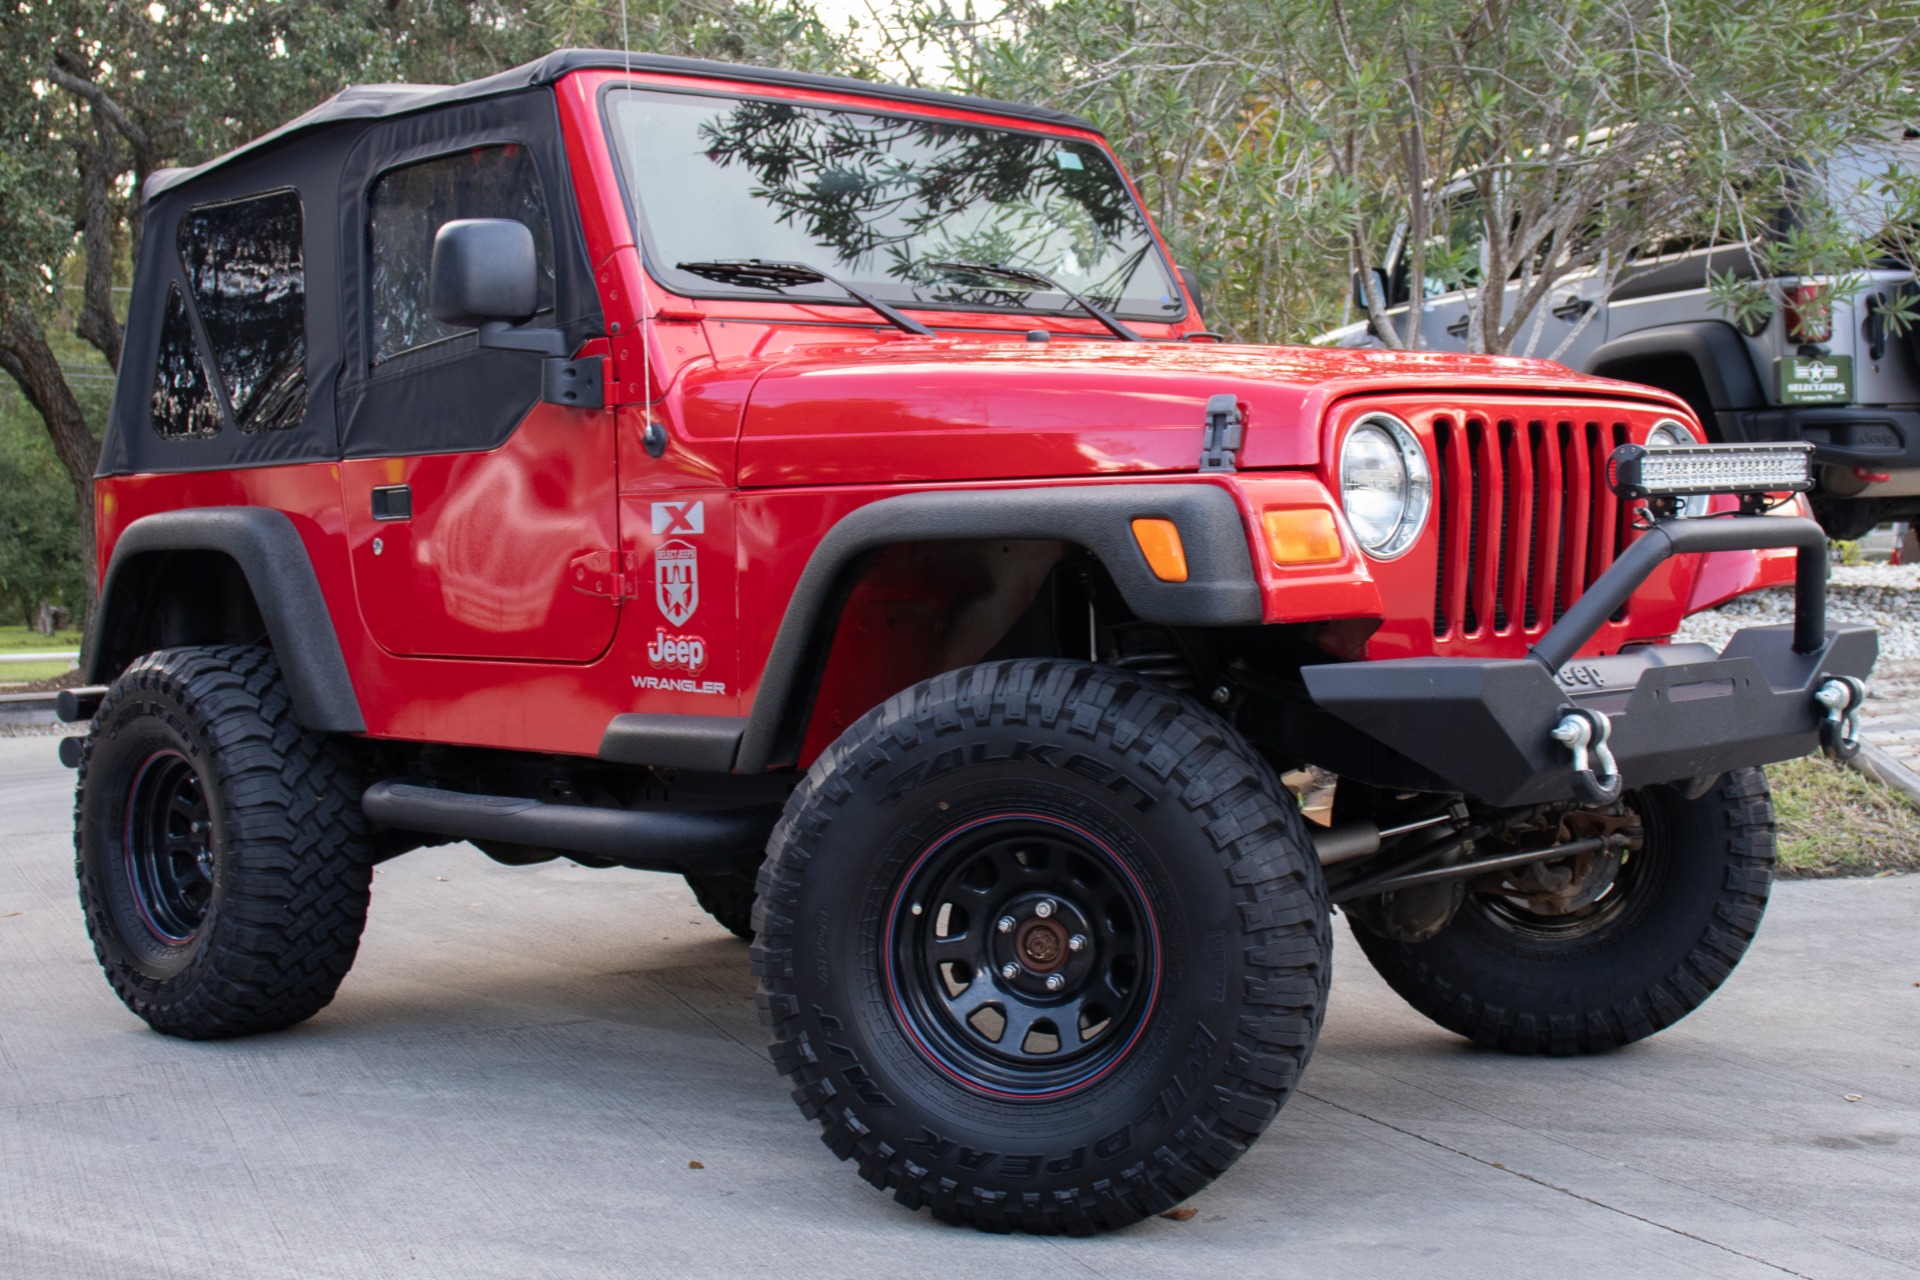 Used 2006 Jeep Wrangler X For Sale ($21,995) | Select Jeeps Inc. Stock  #700307